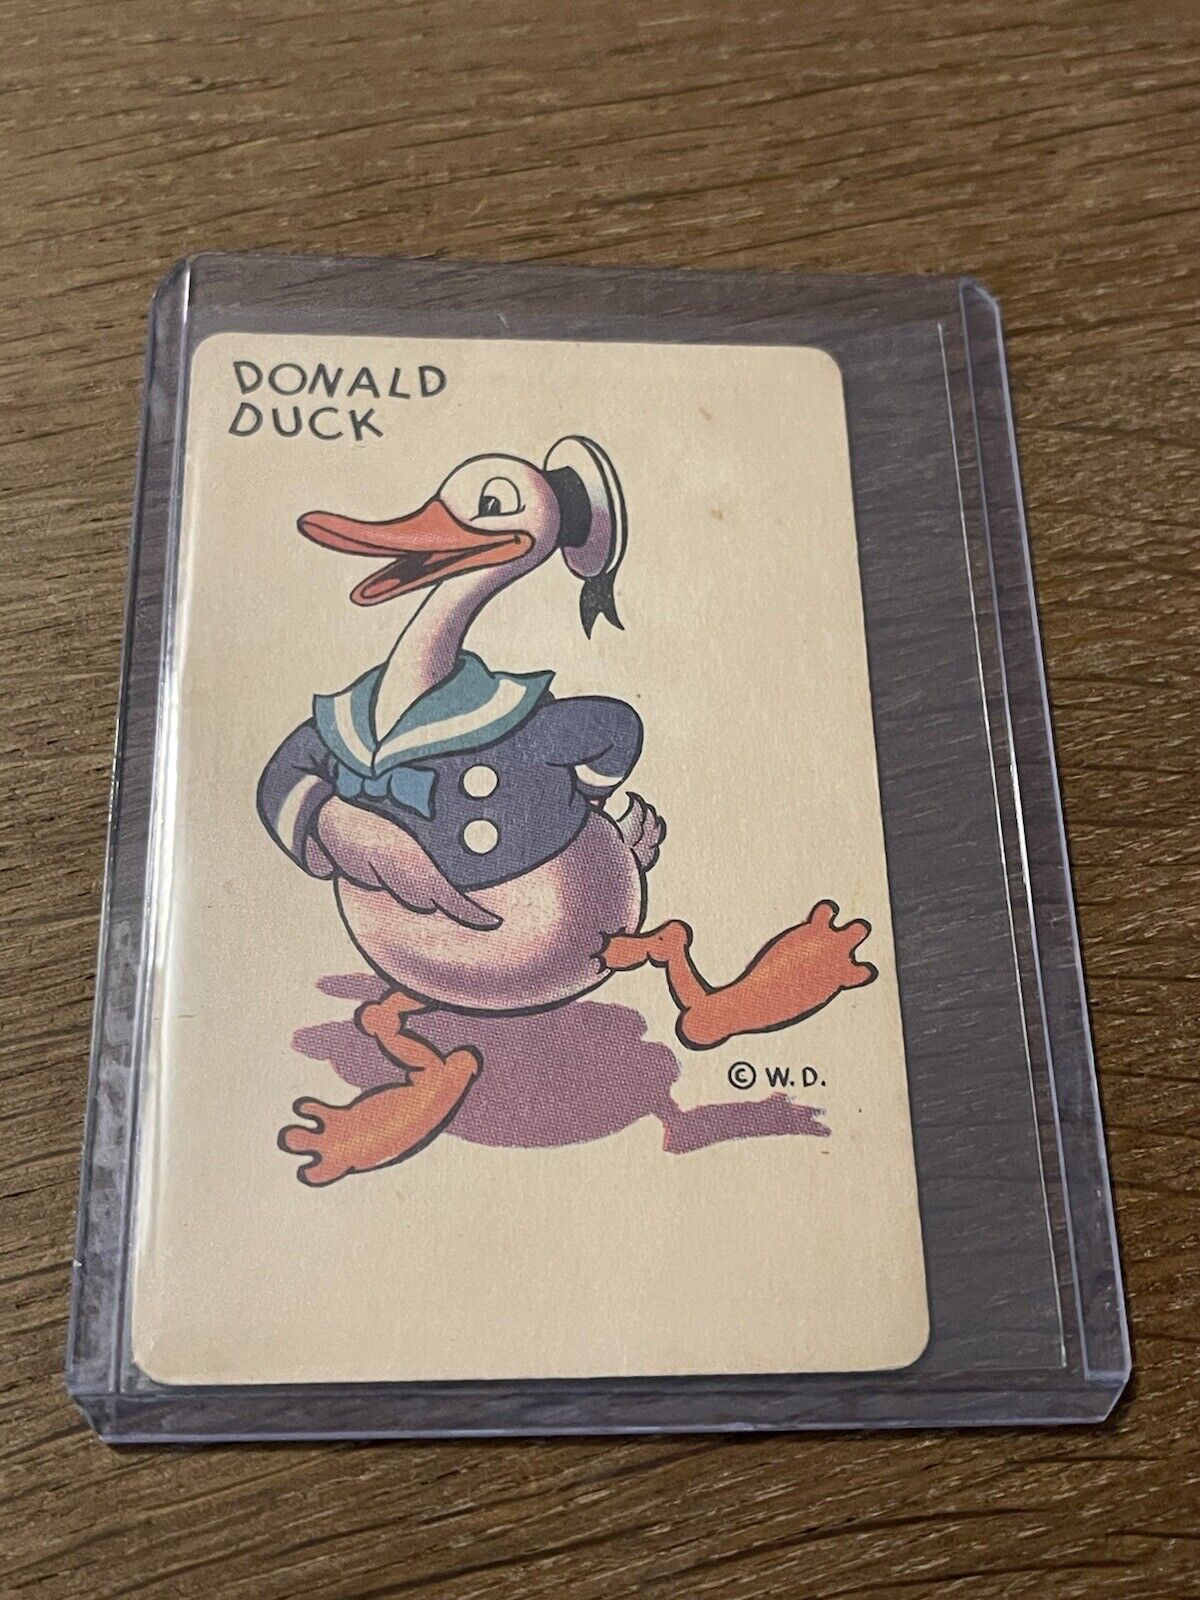 1935 WHITMAN WALT DISNEY PRODUCTIONS 🎥 DONALD DUCK CARD GAME PLAYING CARD